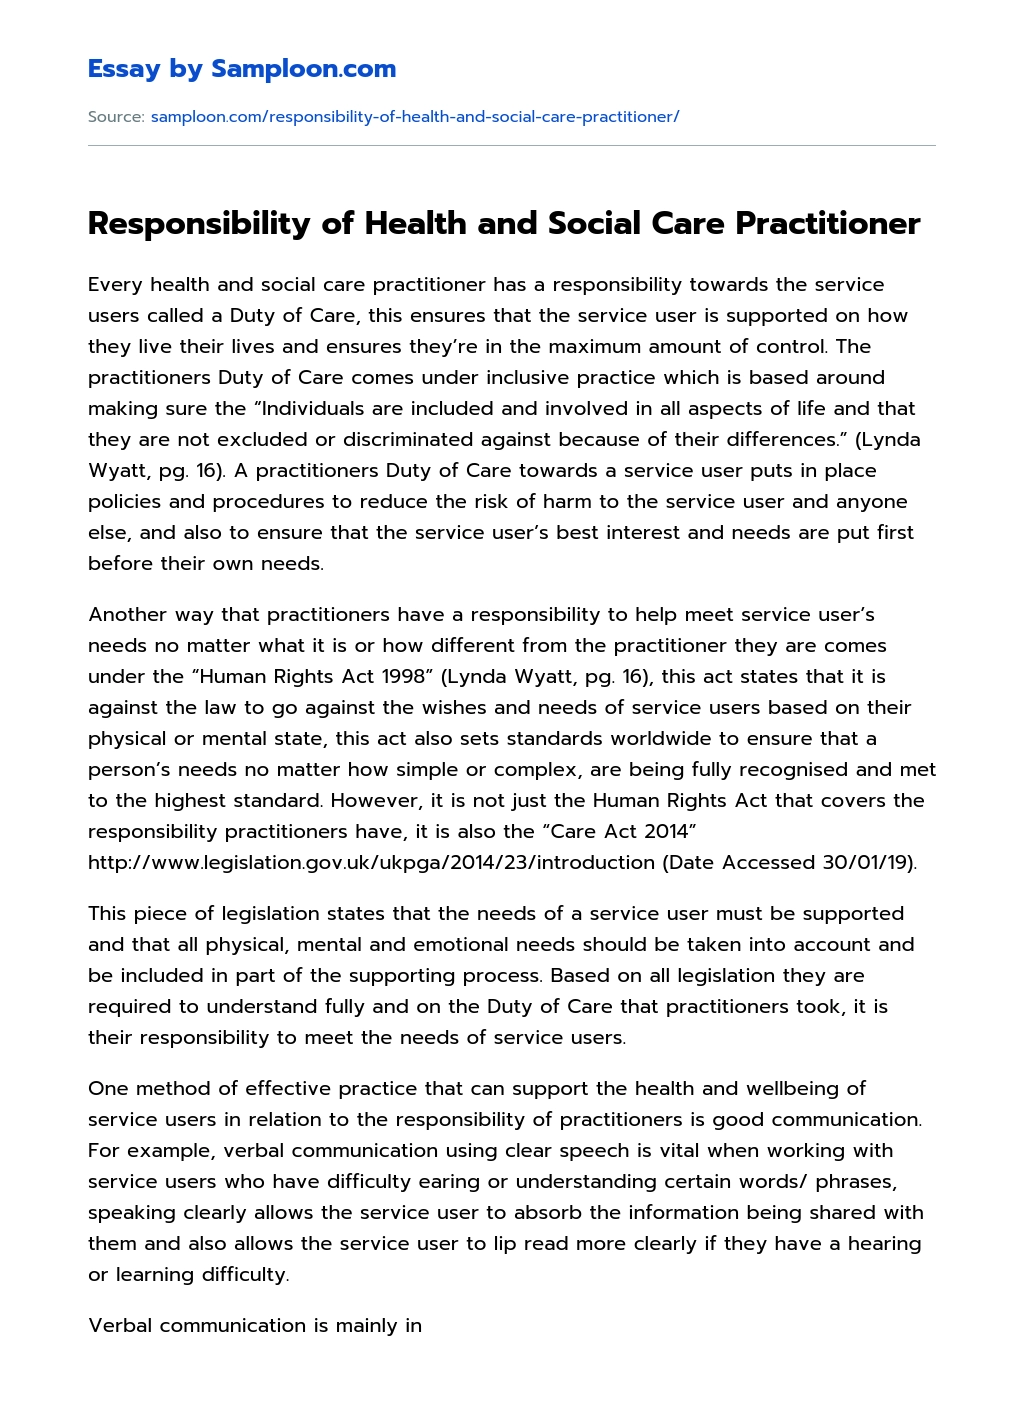 Responsibility of Health and Social Care Practitioner essay